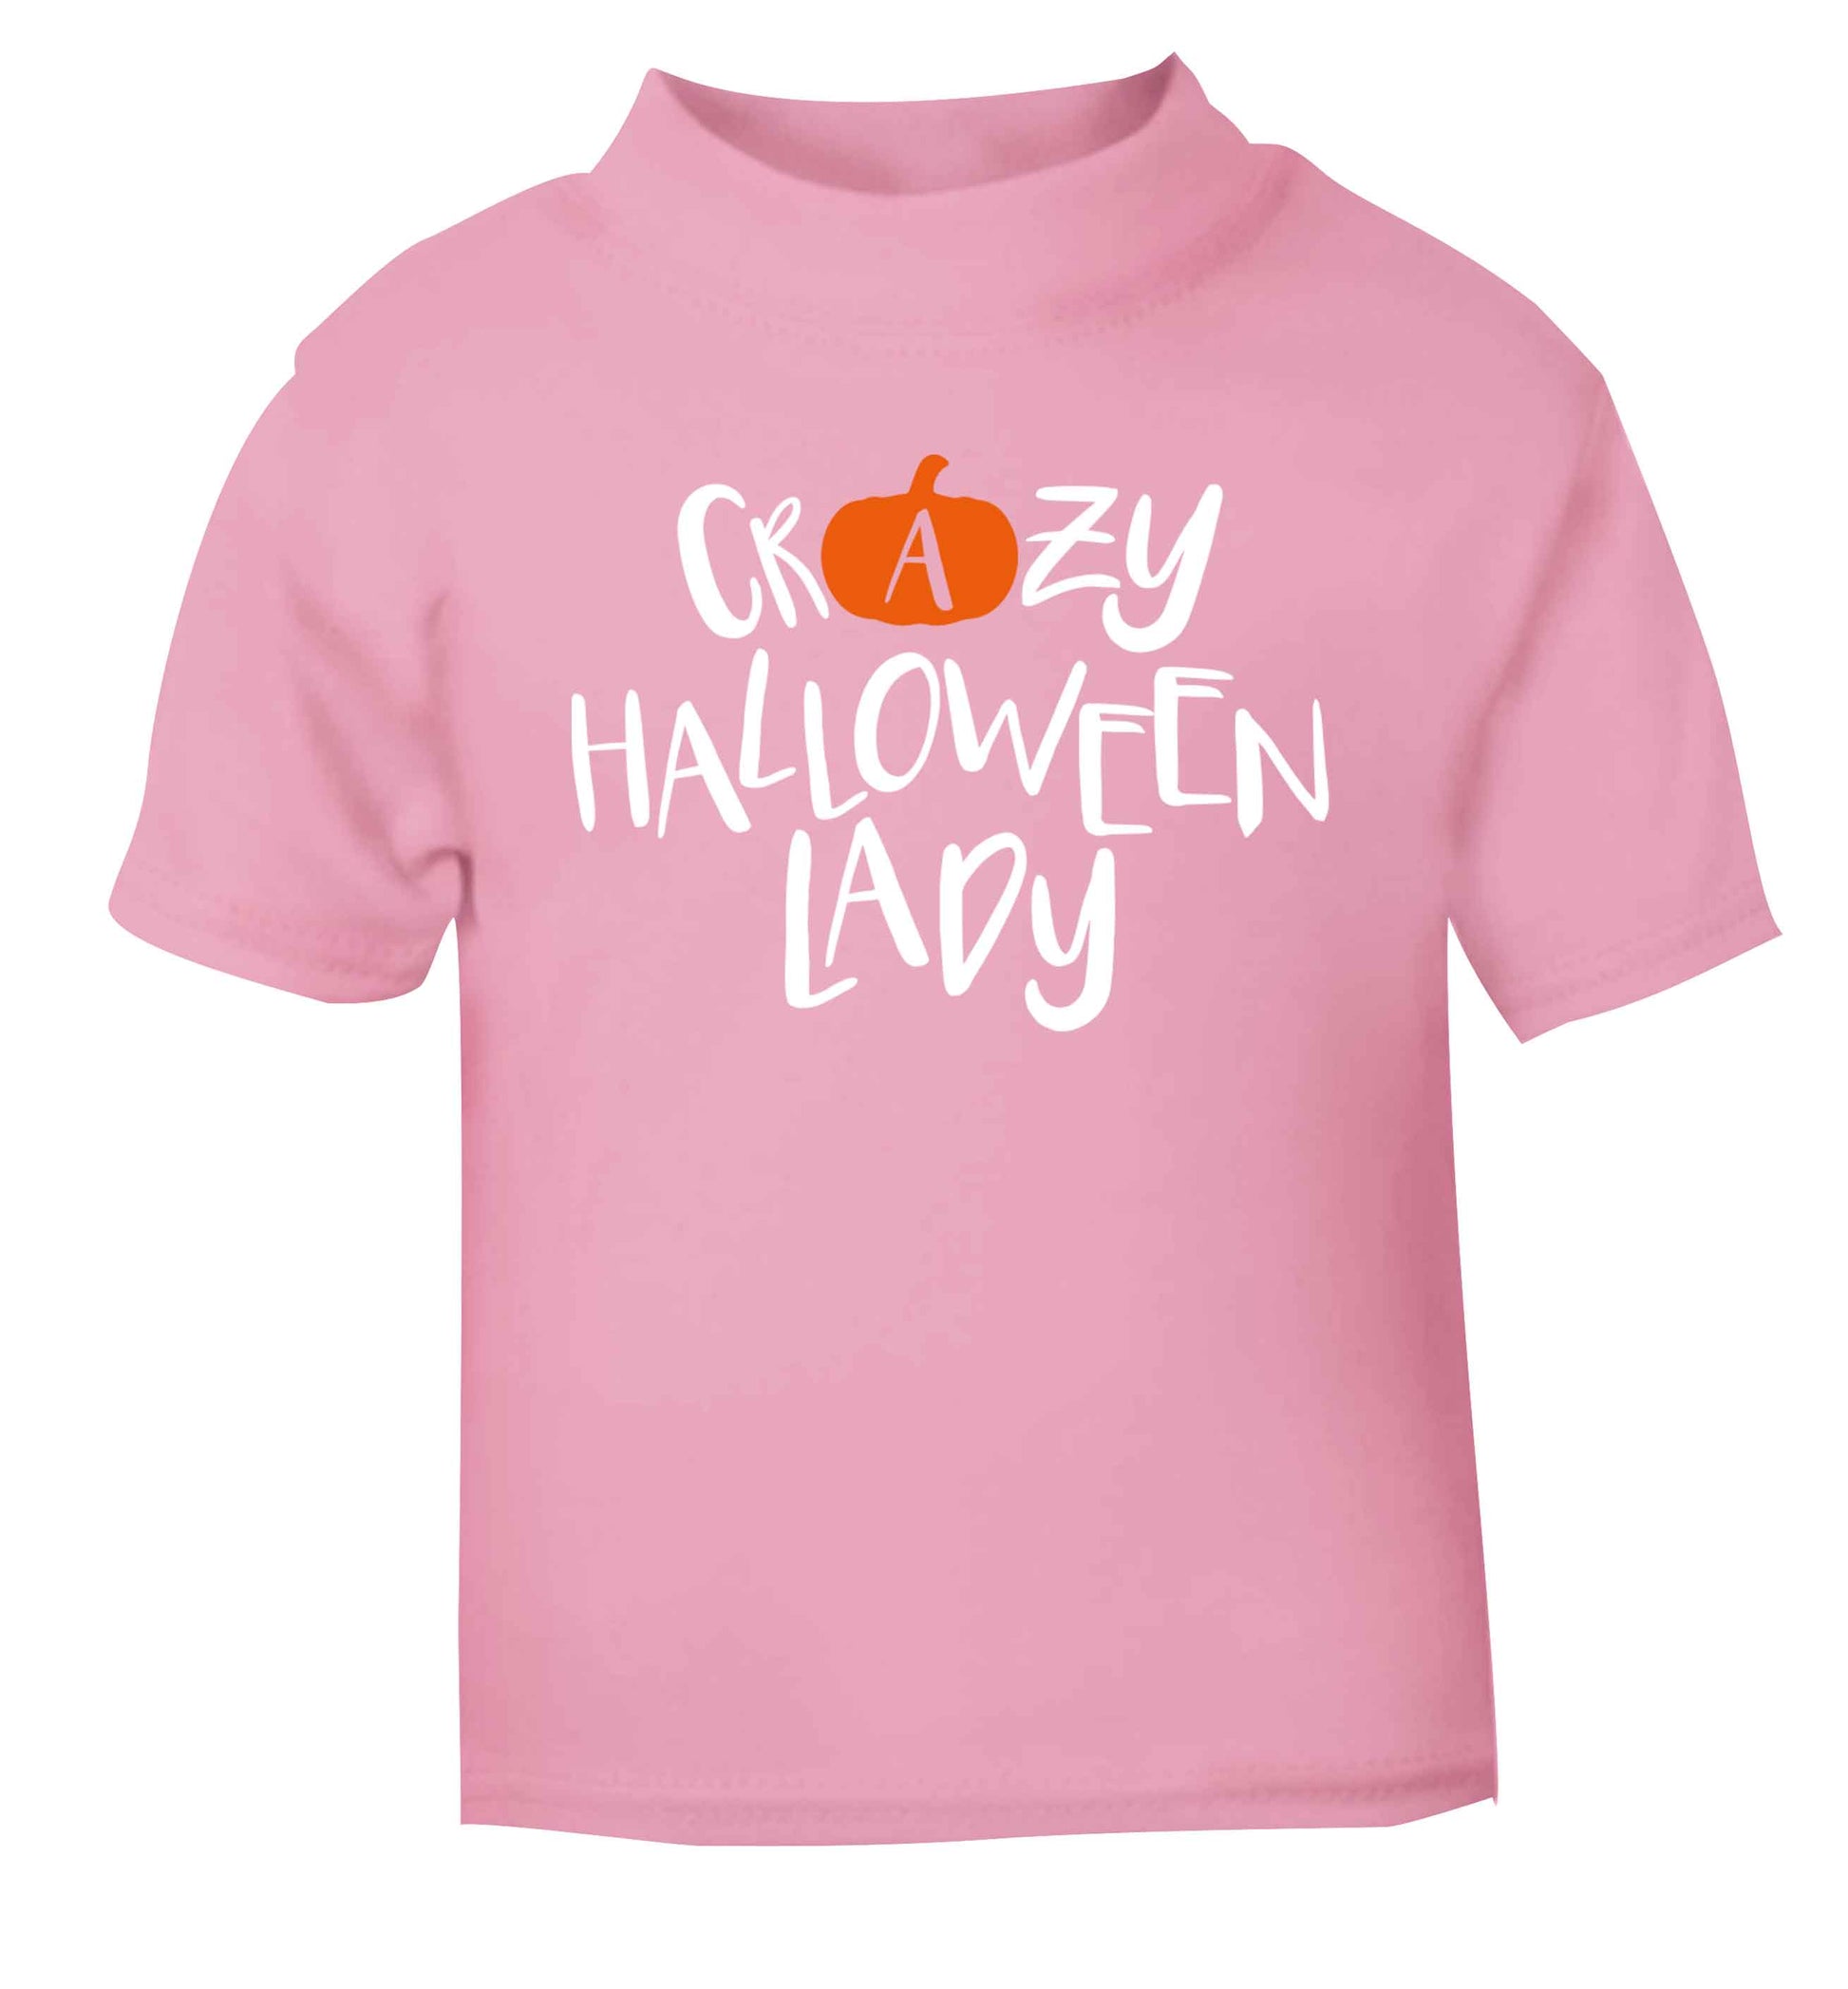 Crazy halloween lady light pink baby toddler Tshirt 2 Years